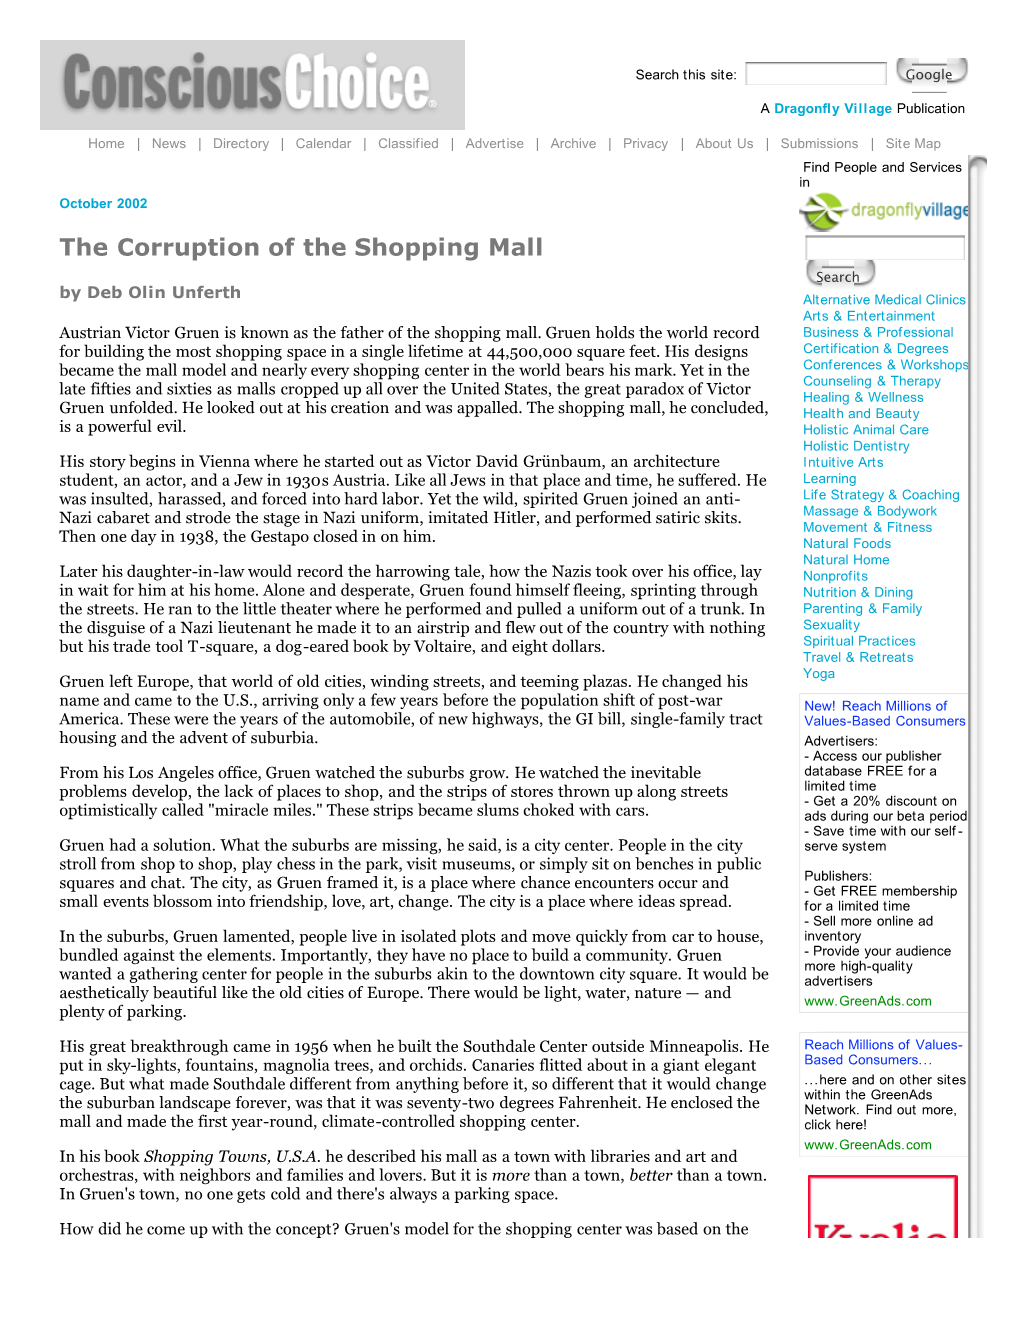 The Corruption of the Shopping Mall